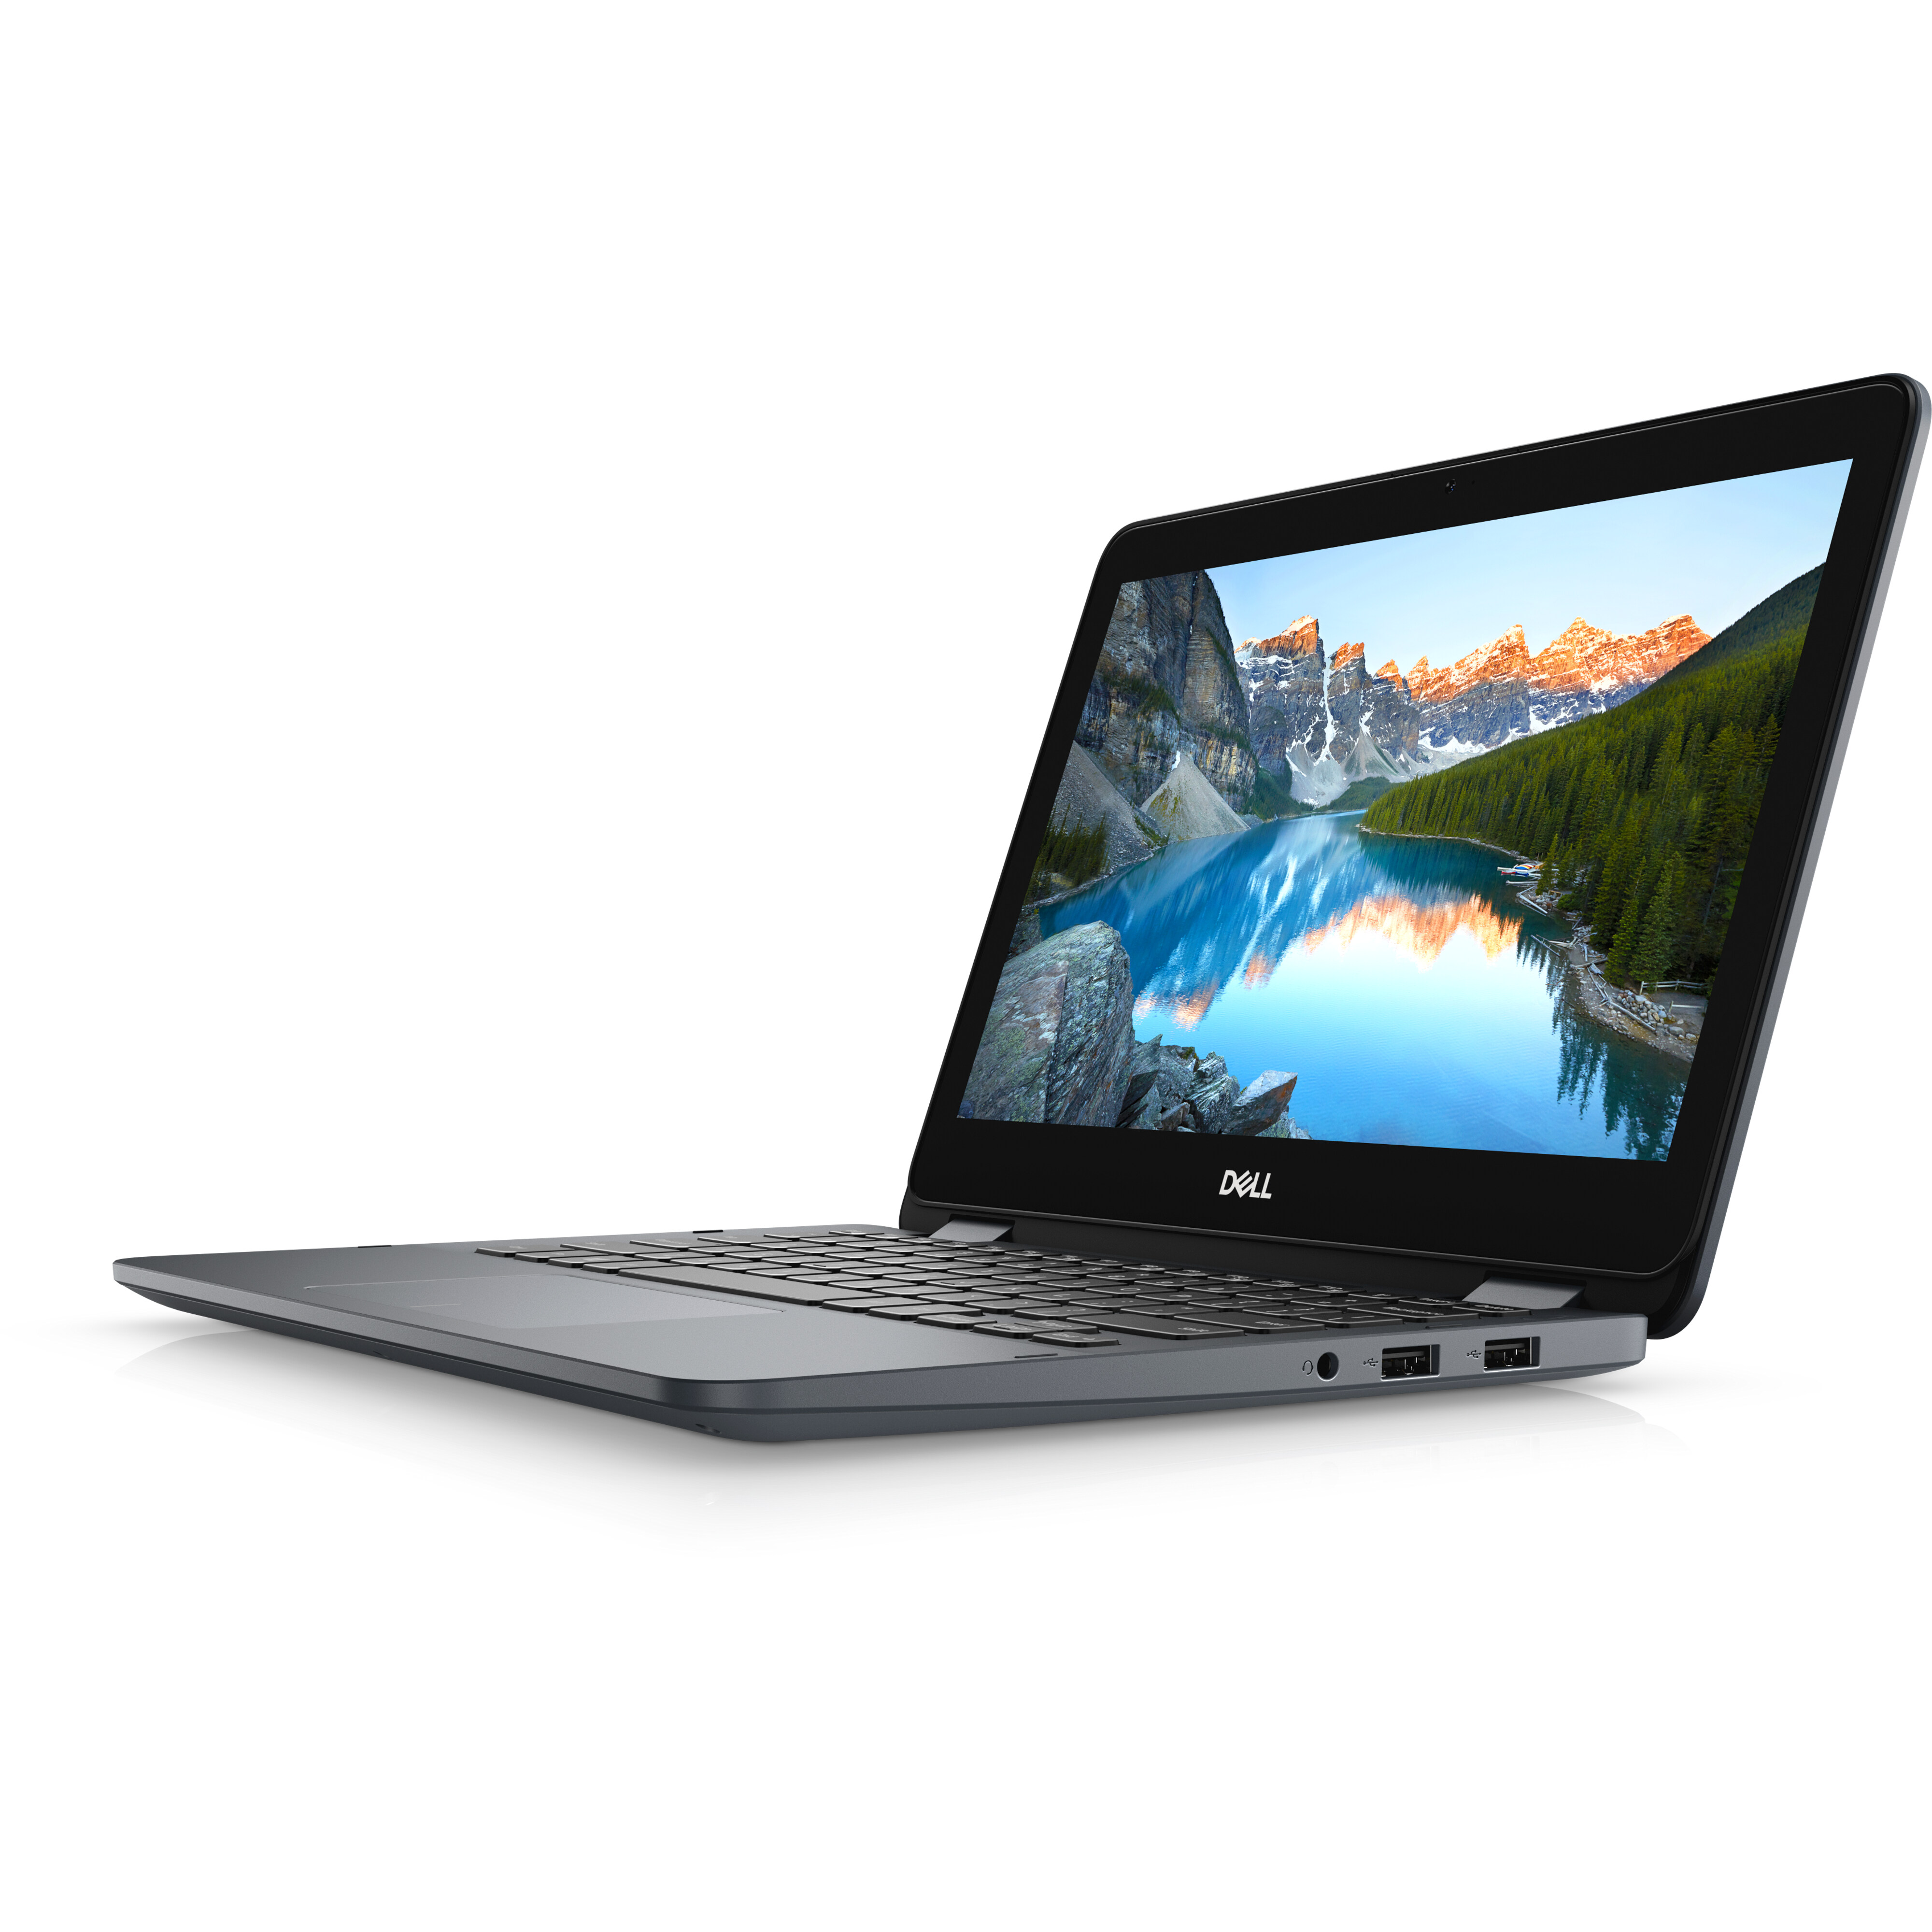 Dell Inspiron 11 3000 2-in-1 Laptop